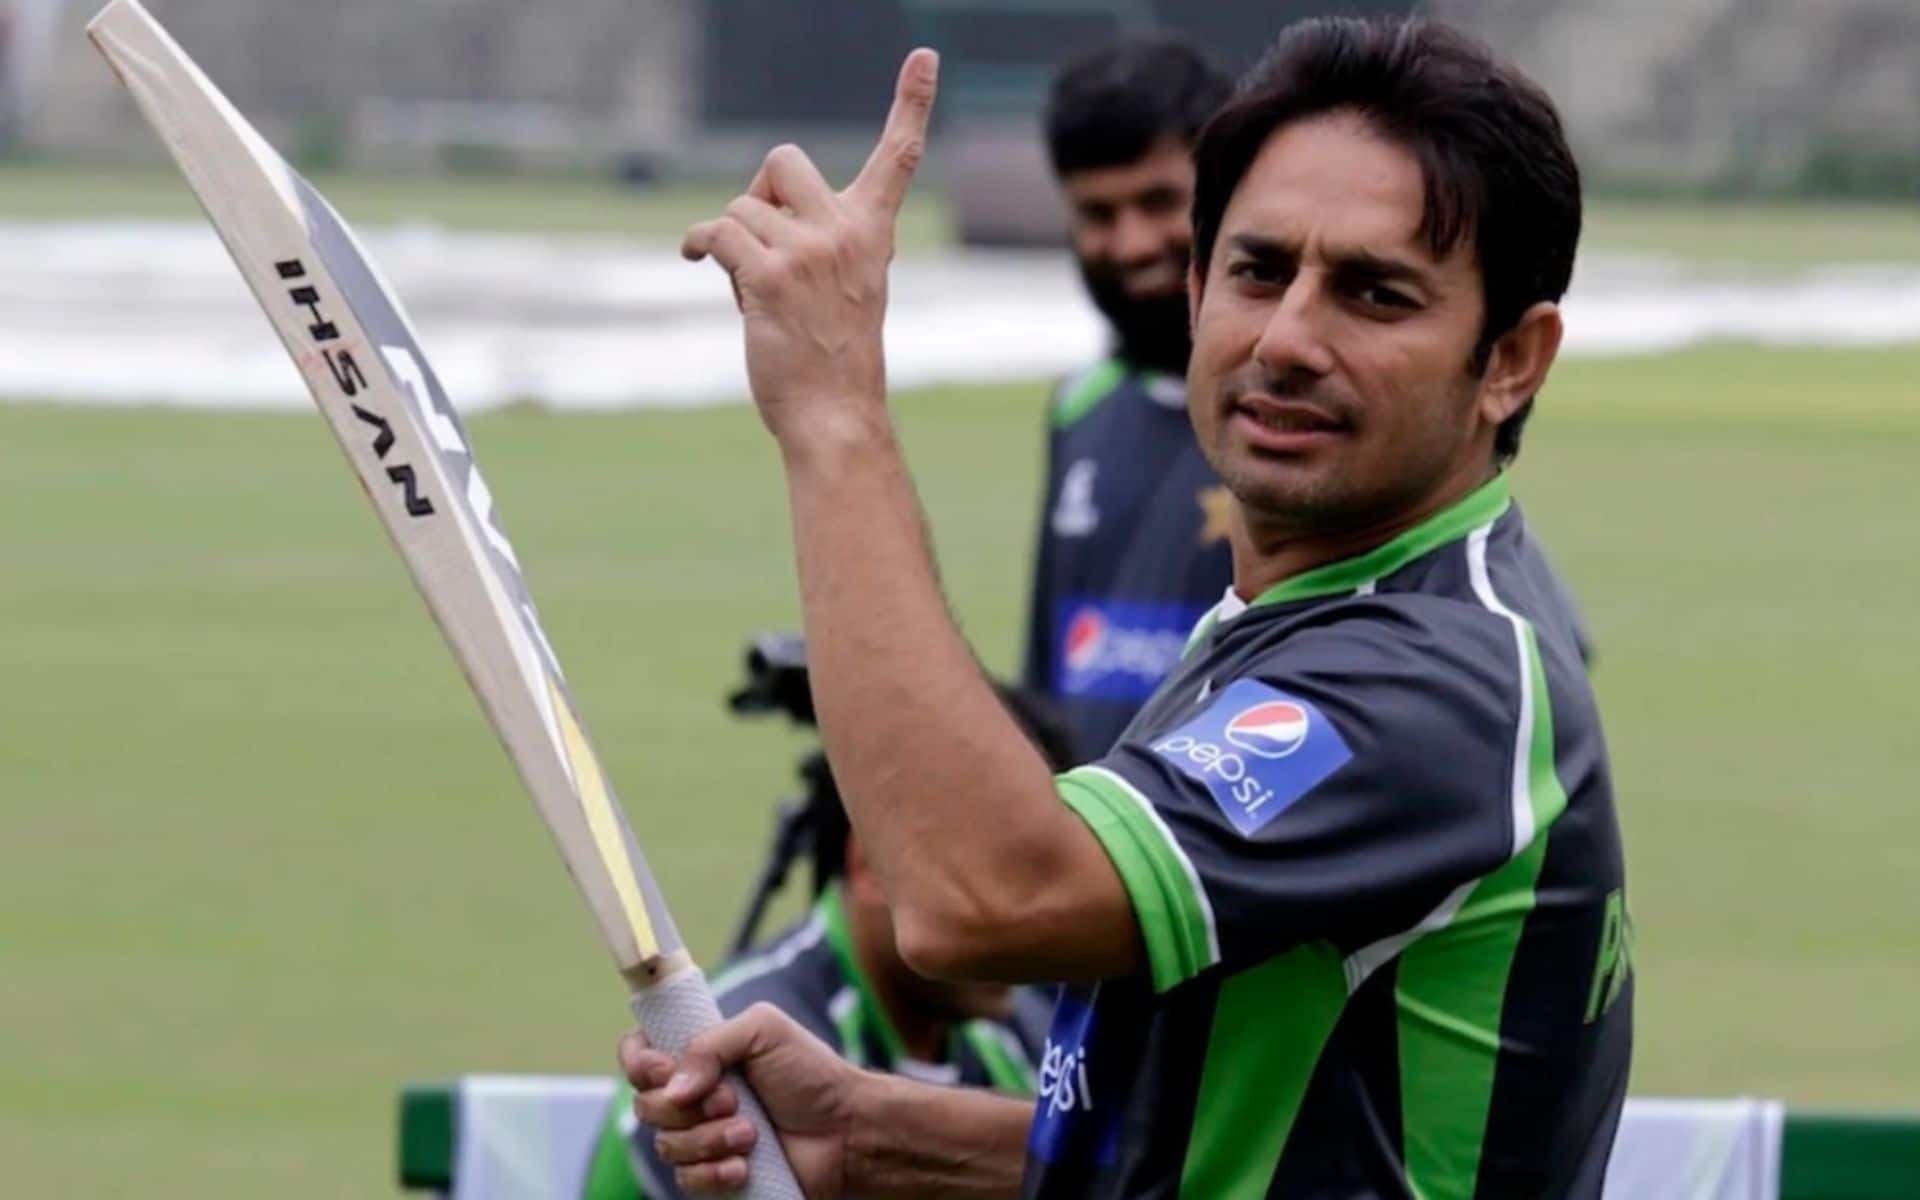 Saeed Ajmal during a training session (AP)